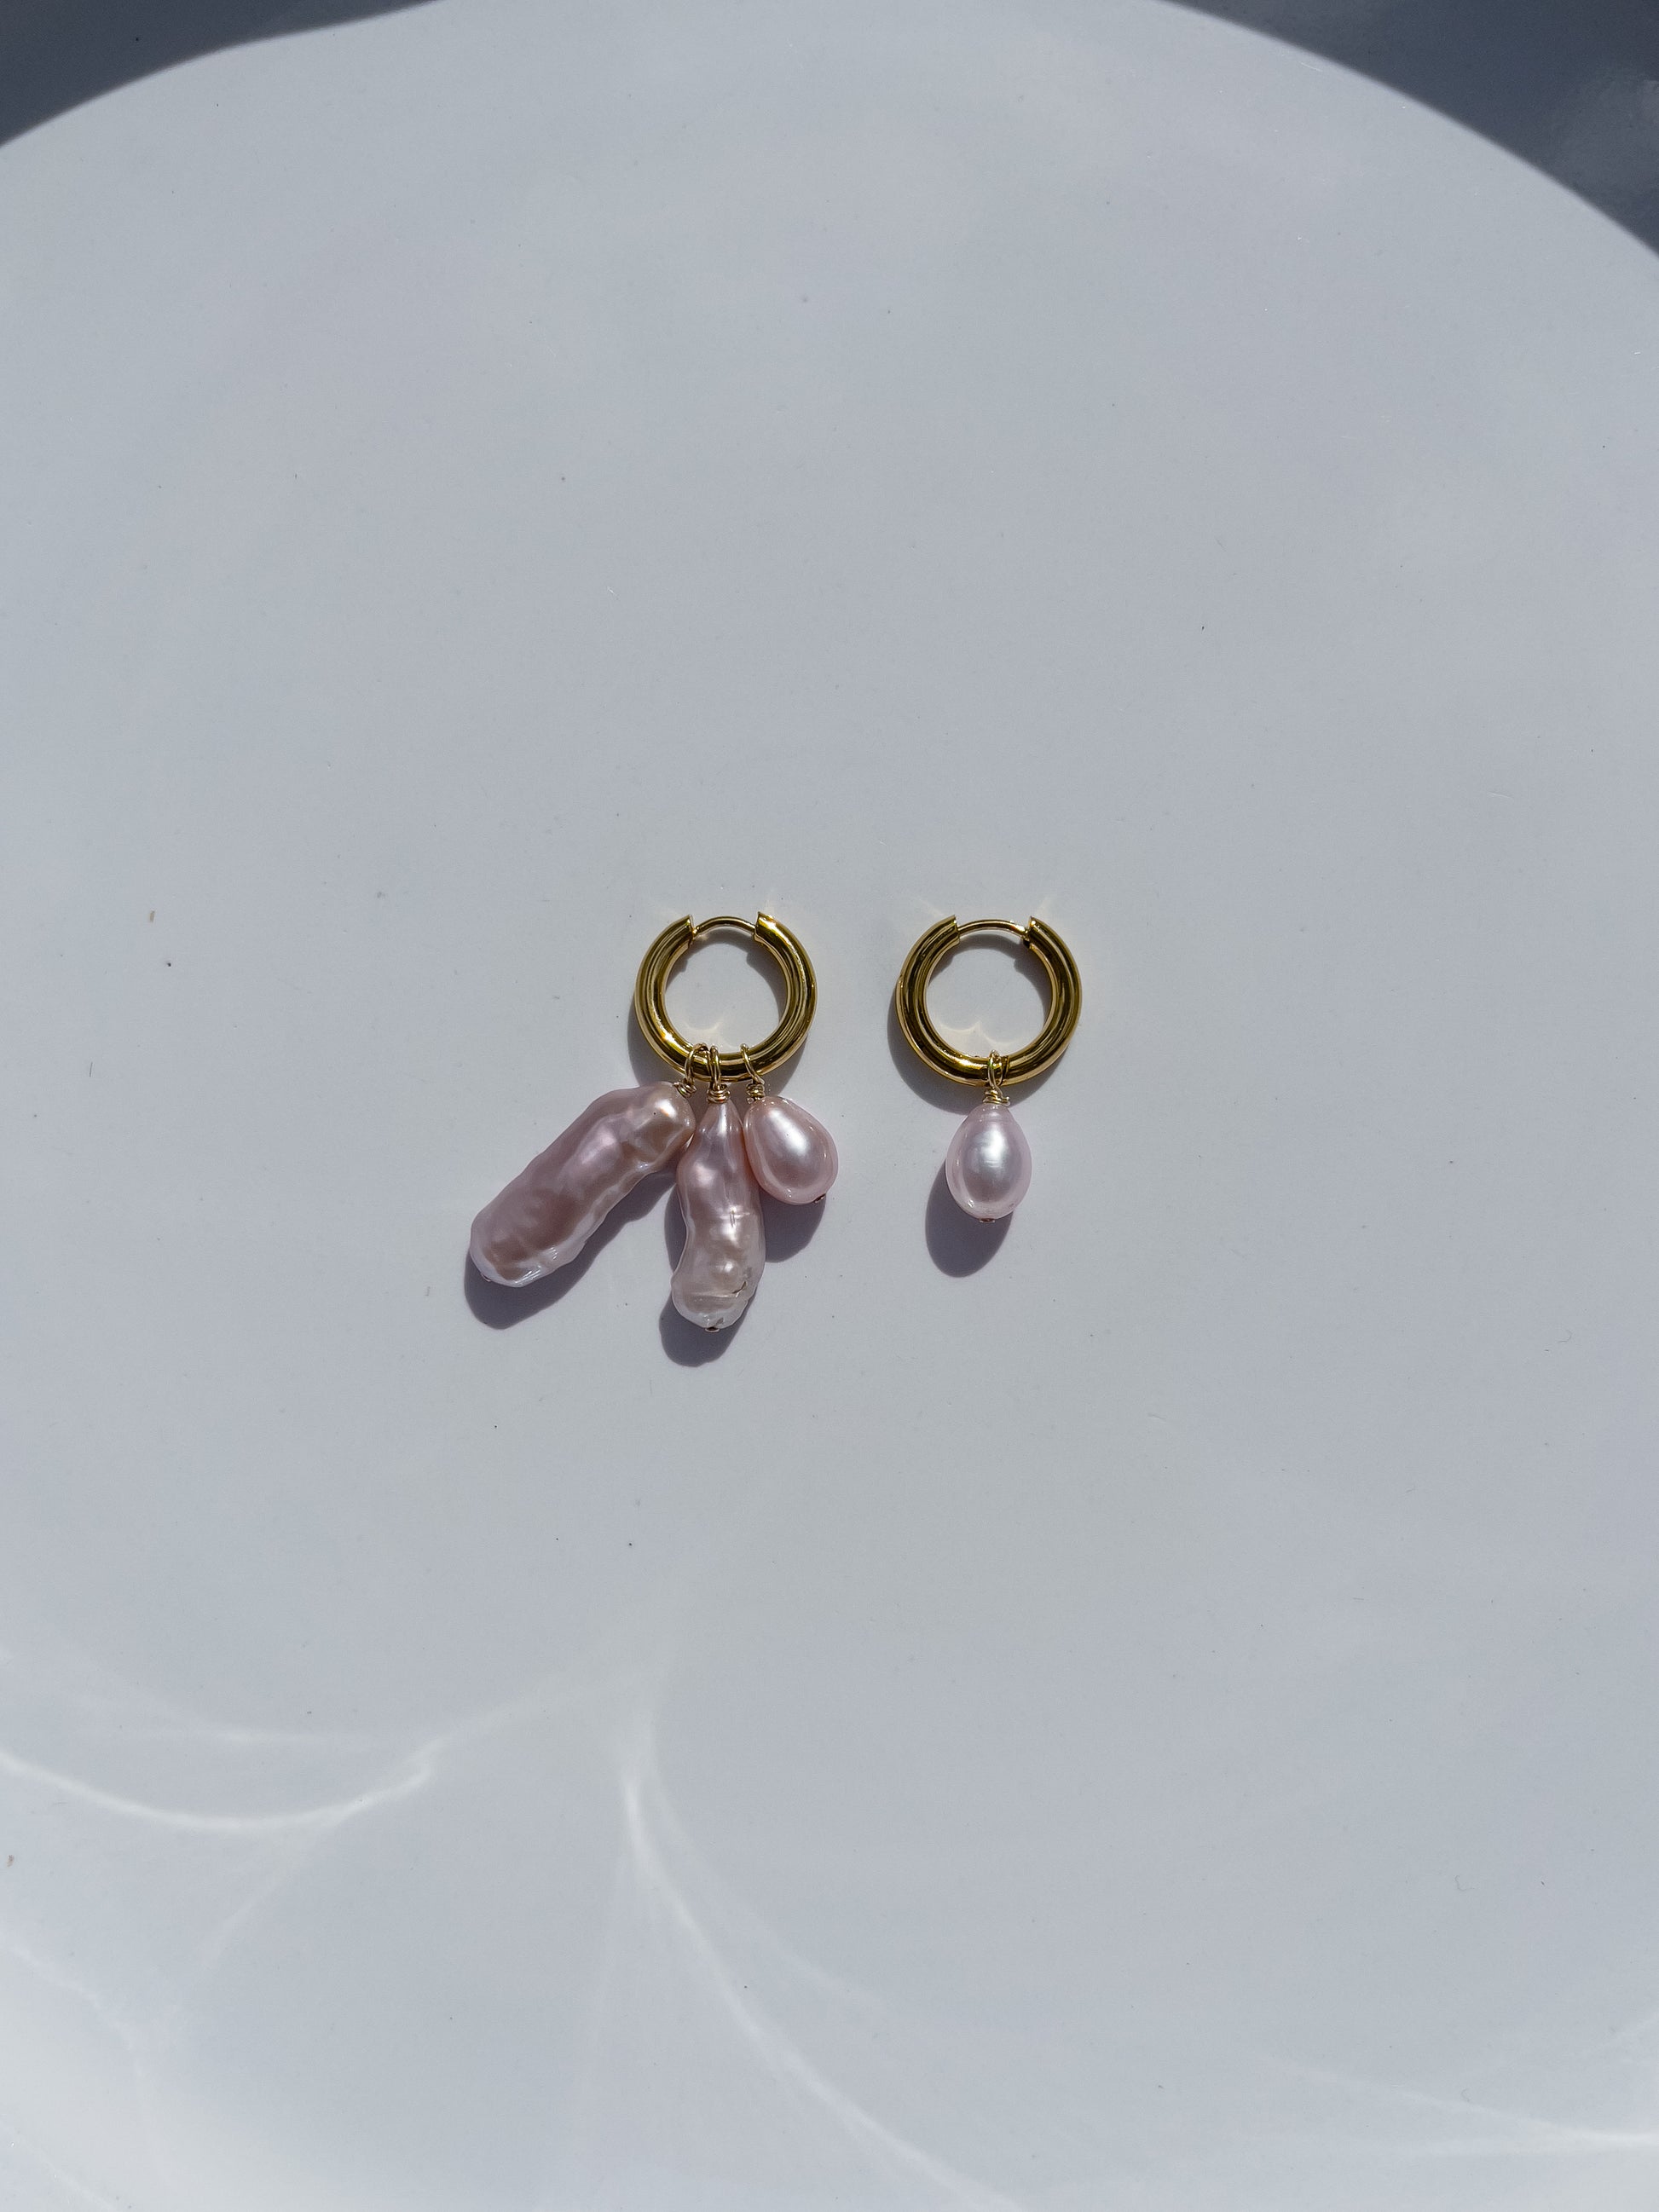 Violet Keshi Pearl Hoop Earrings. Chunky 18 karat Gold filled hoops, suspends both Violet Keshi, and Violet Teardrop pearls, and are AA quality.  In this minimal design, the free formed Keshi pearls, against the ultra smooth teardrop pearls are strikingly unique.